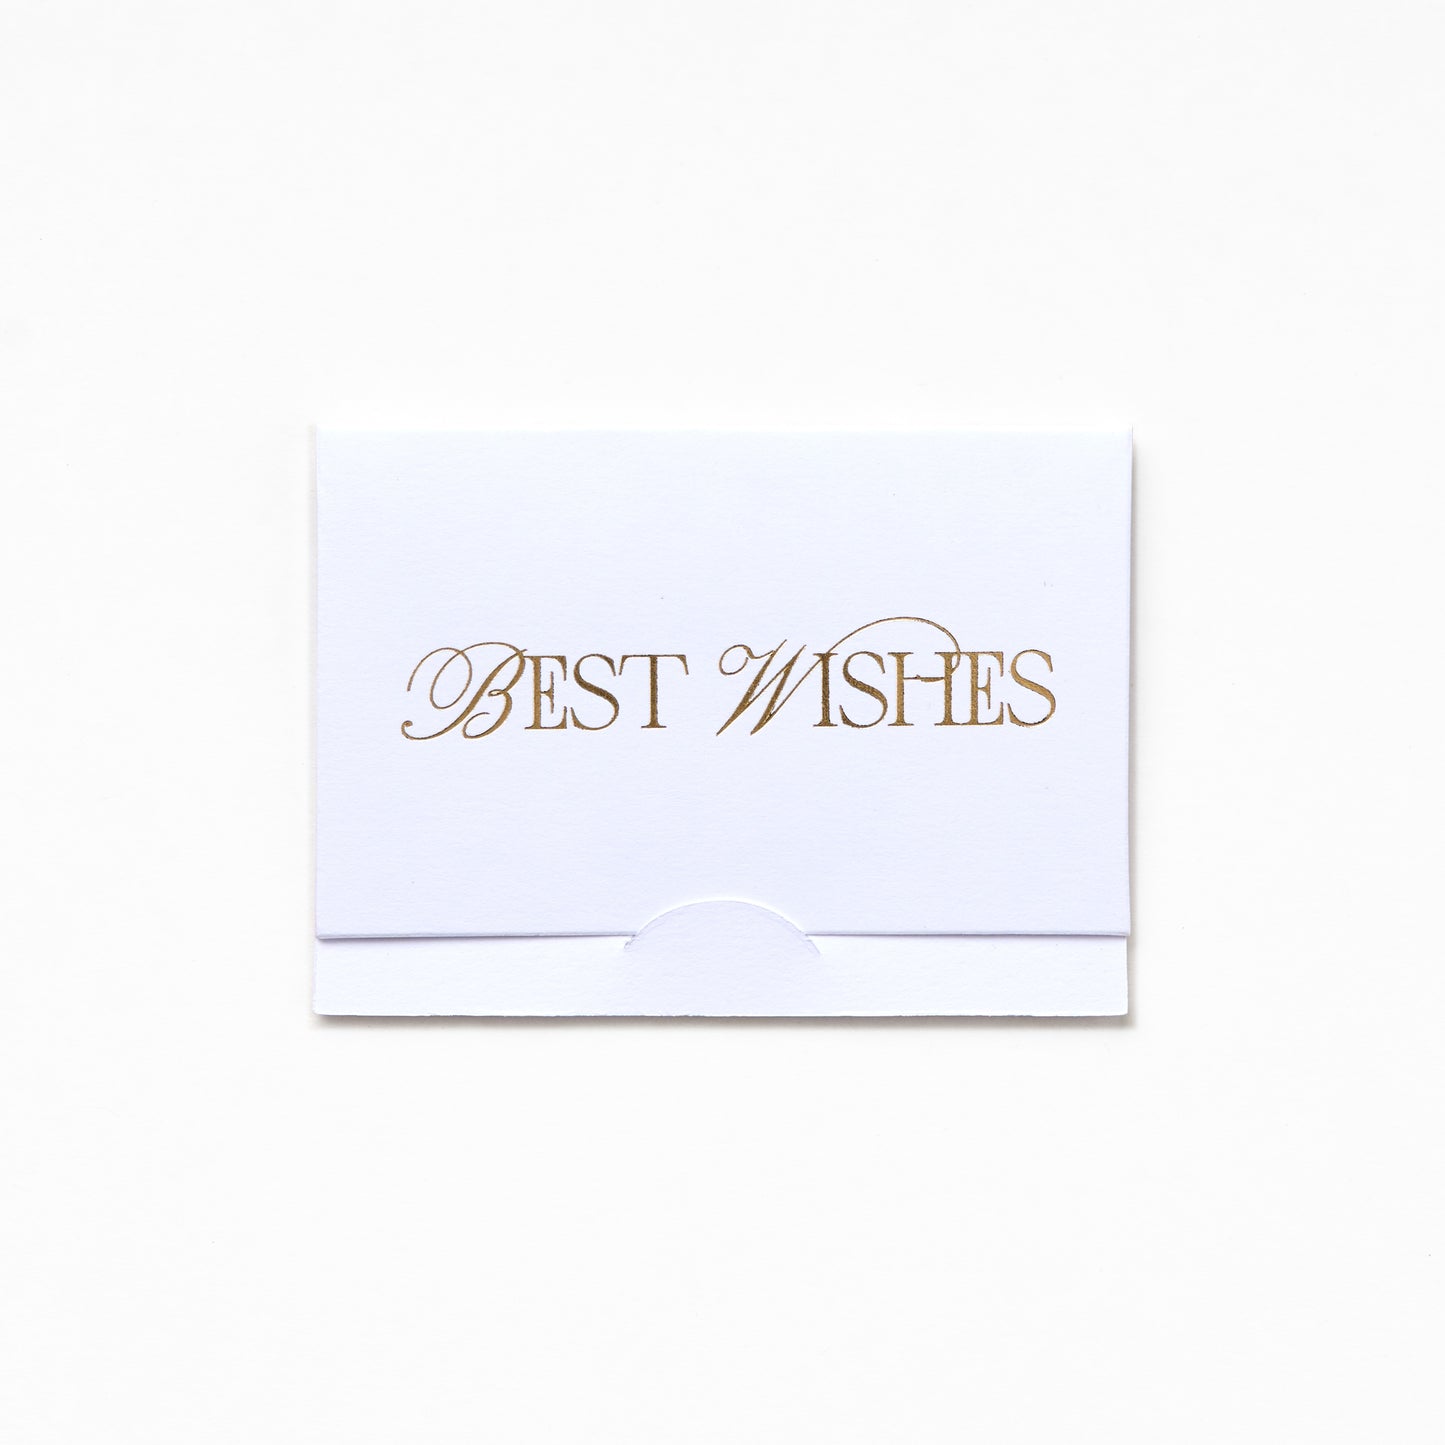 Pocket Greeting Card - BEST WISHES